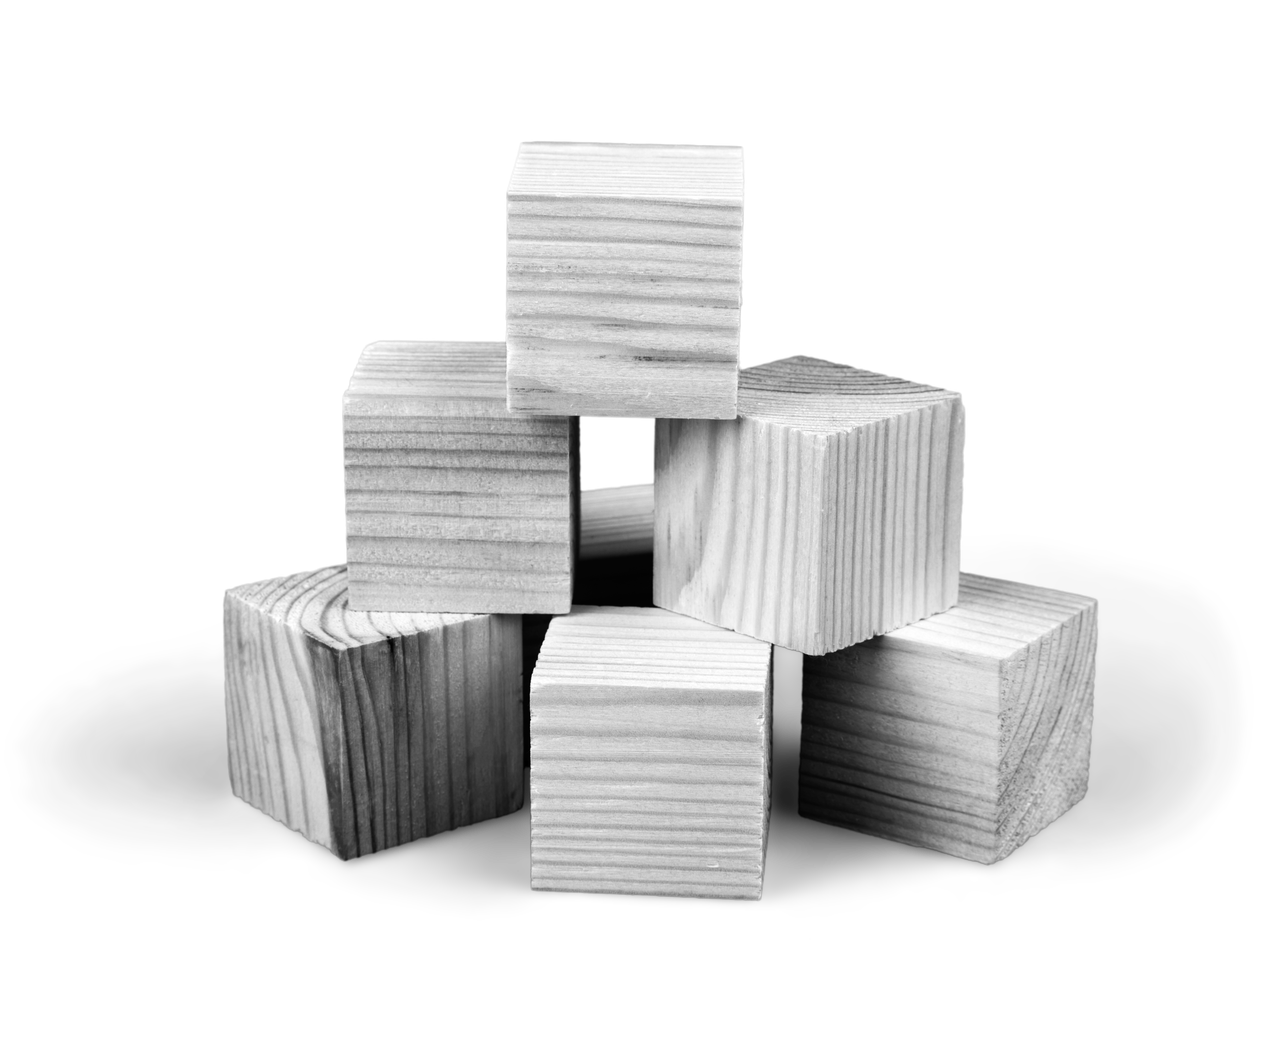 Six wooden blocks stacked in a pyramid